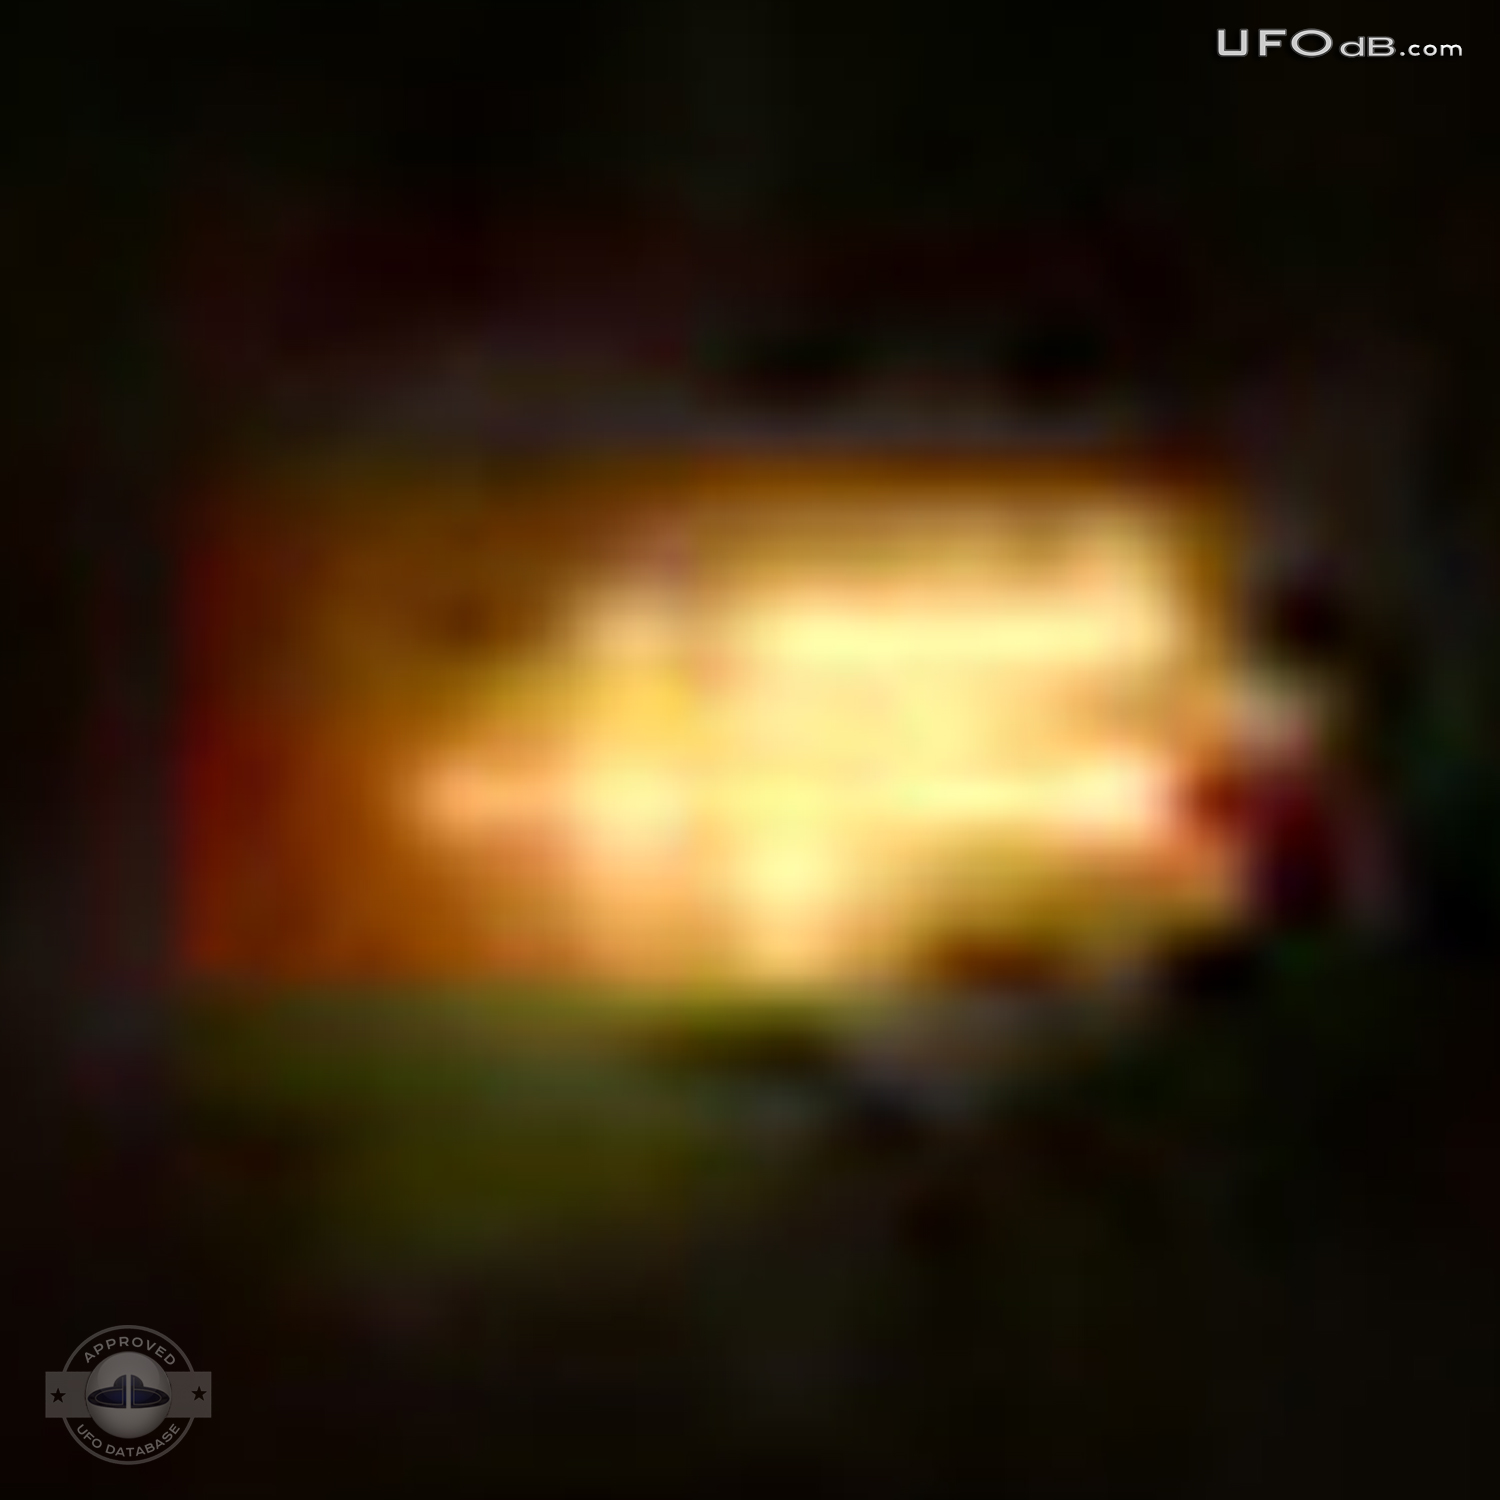 Too slow to be an airplane - UFO picture - South Africa January 1 2011 UFO Picture #278-4